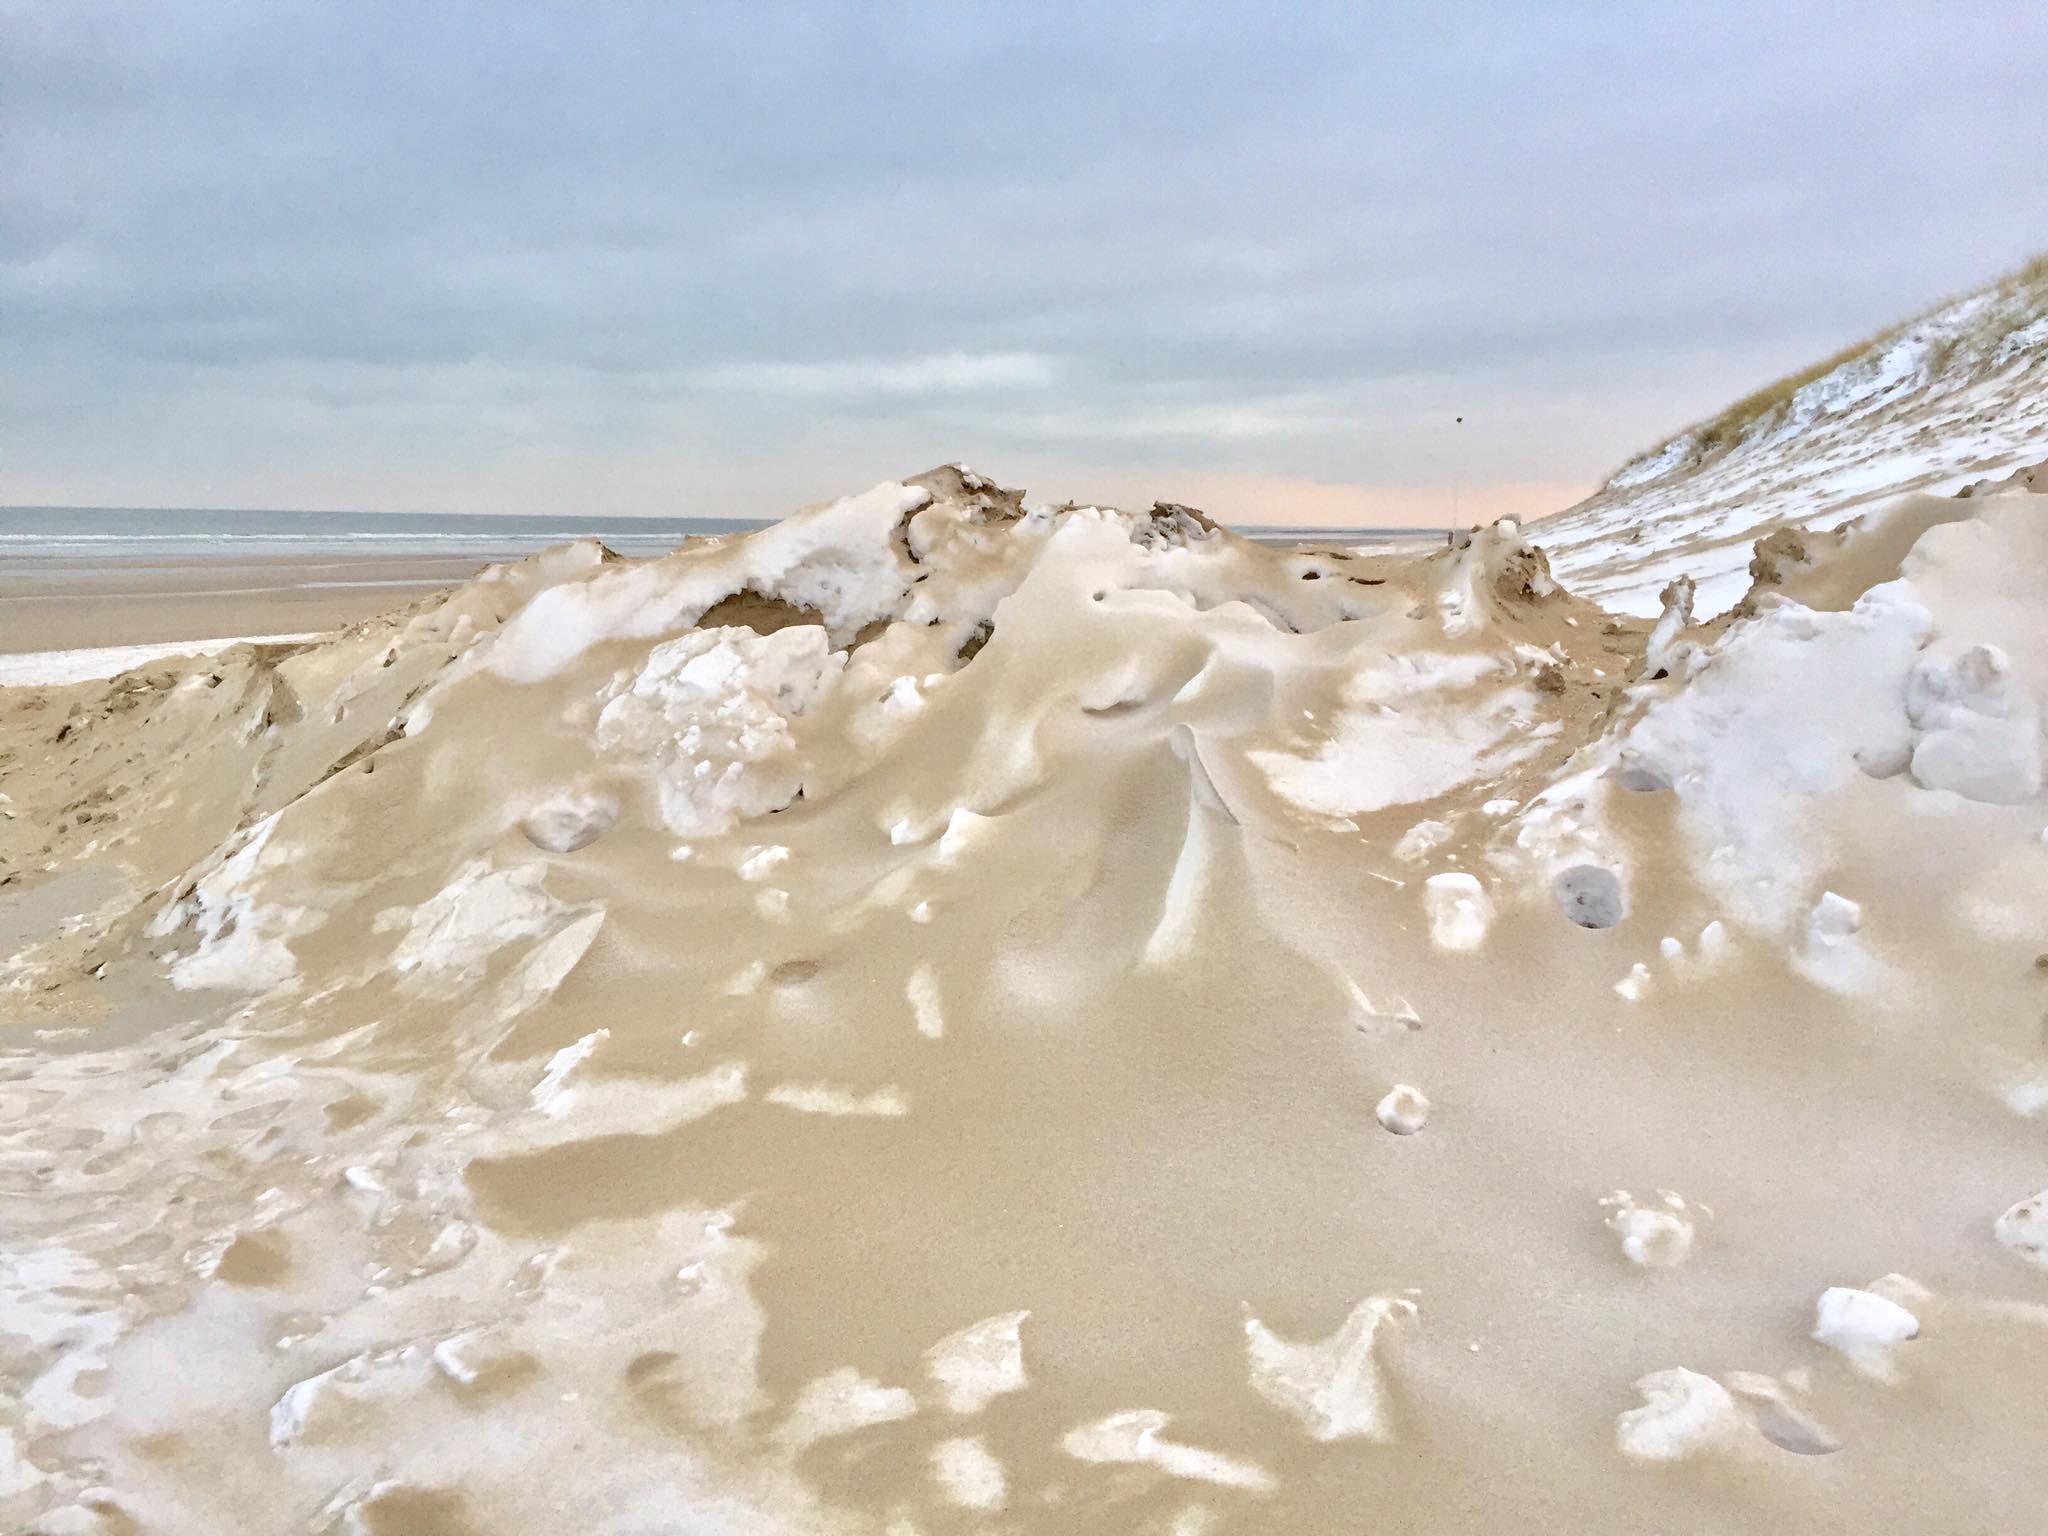 There was no trace of humans over the snowed-up beach